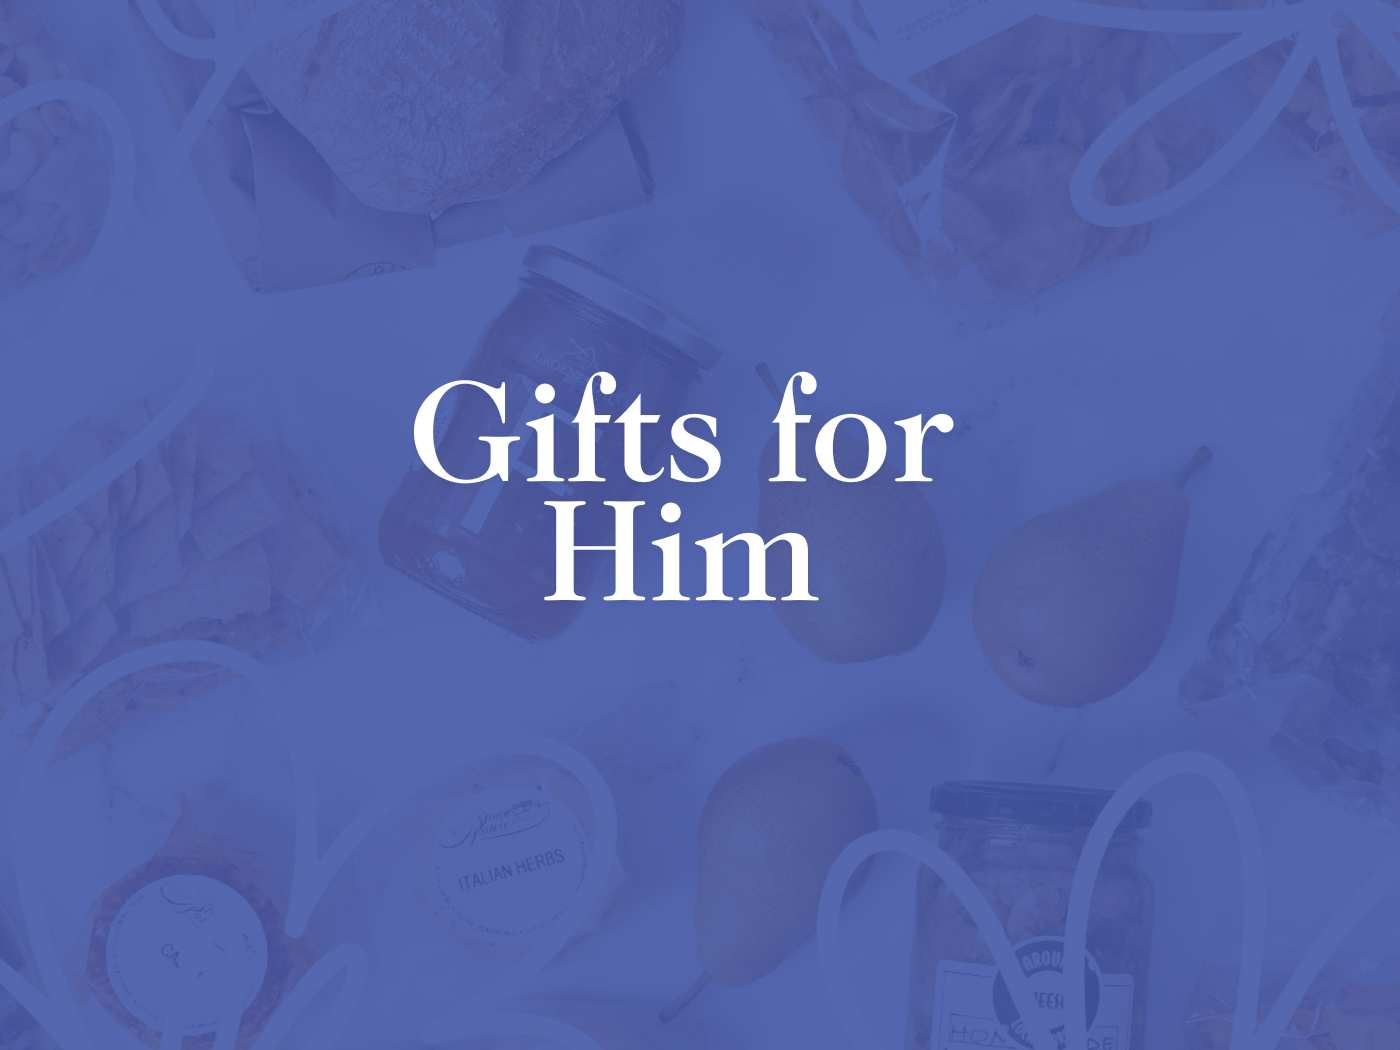 A collection of various gift items overlaid with the text 'Gifts for Him' in white on a blue background. Fabulous Flowers and Gifts. Gifts for Him. 